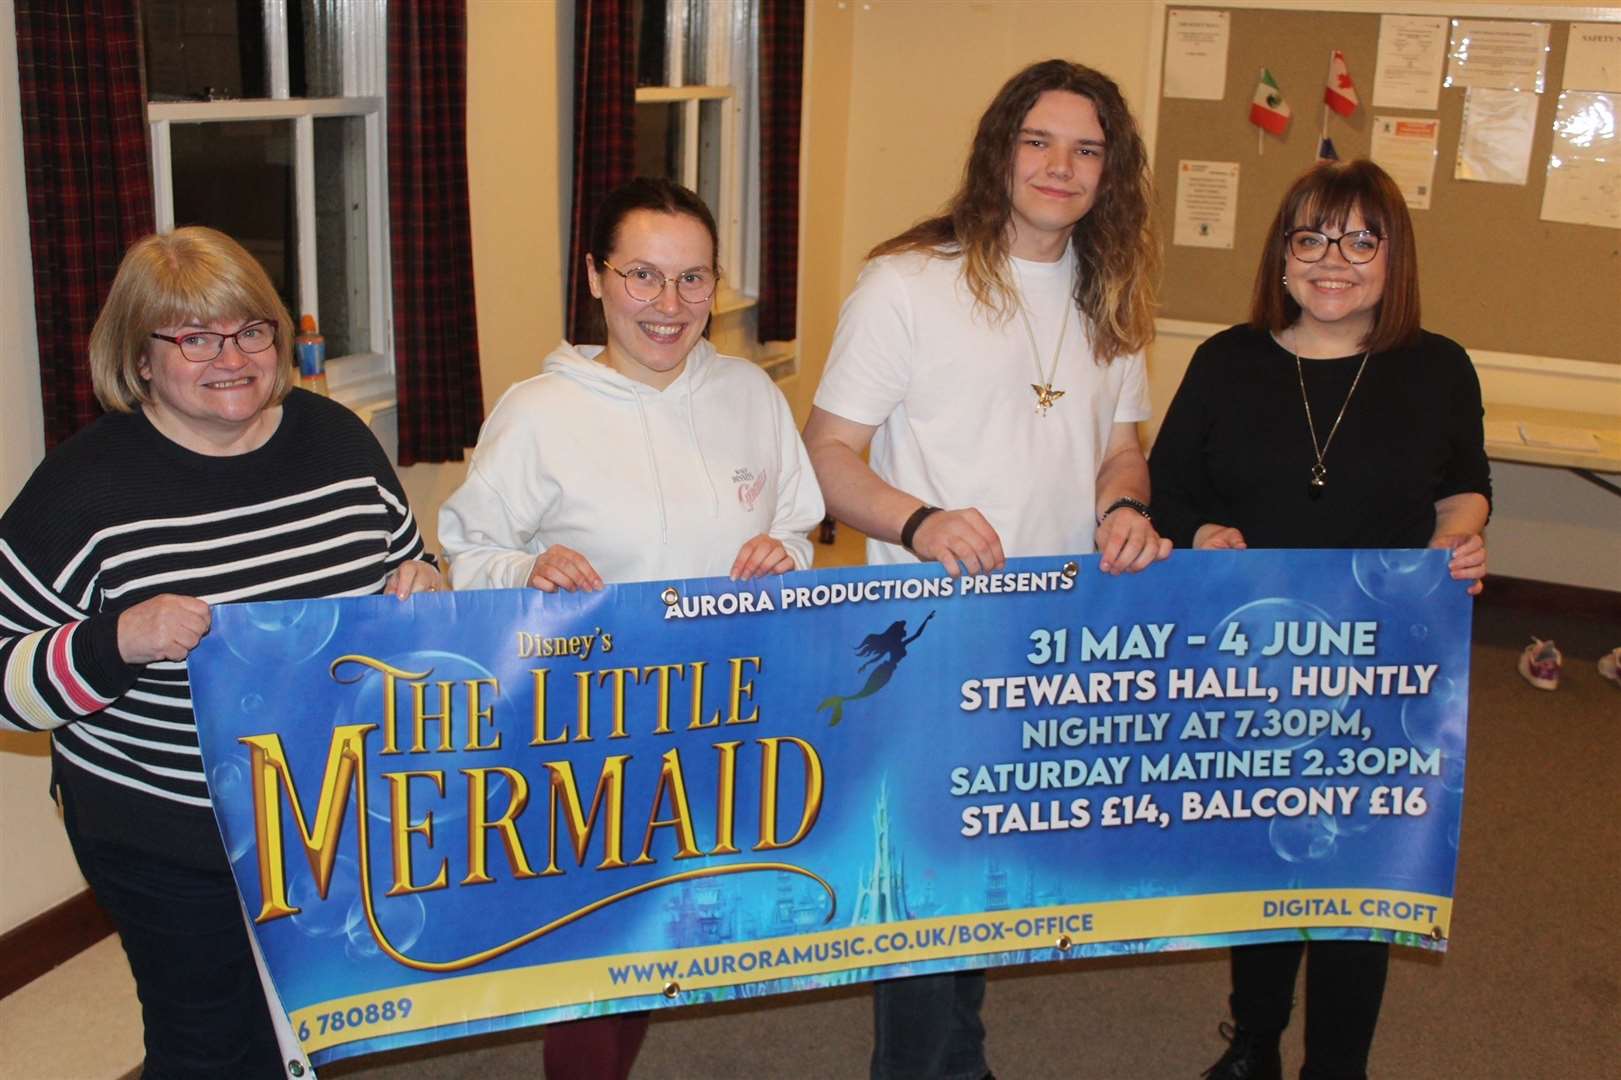 Some of the cast of The Little Mermaid (left to right) are: June Cranna (Ursula), Kirsten Rennie (Ariel), Paul Chalmers (Prince Eric) and Lauren MacAskill (Ursula).